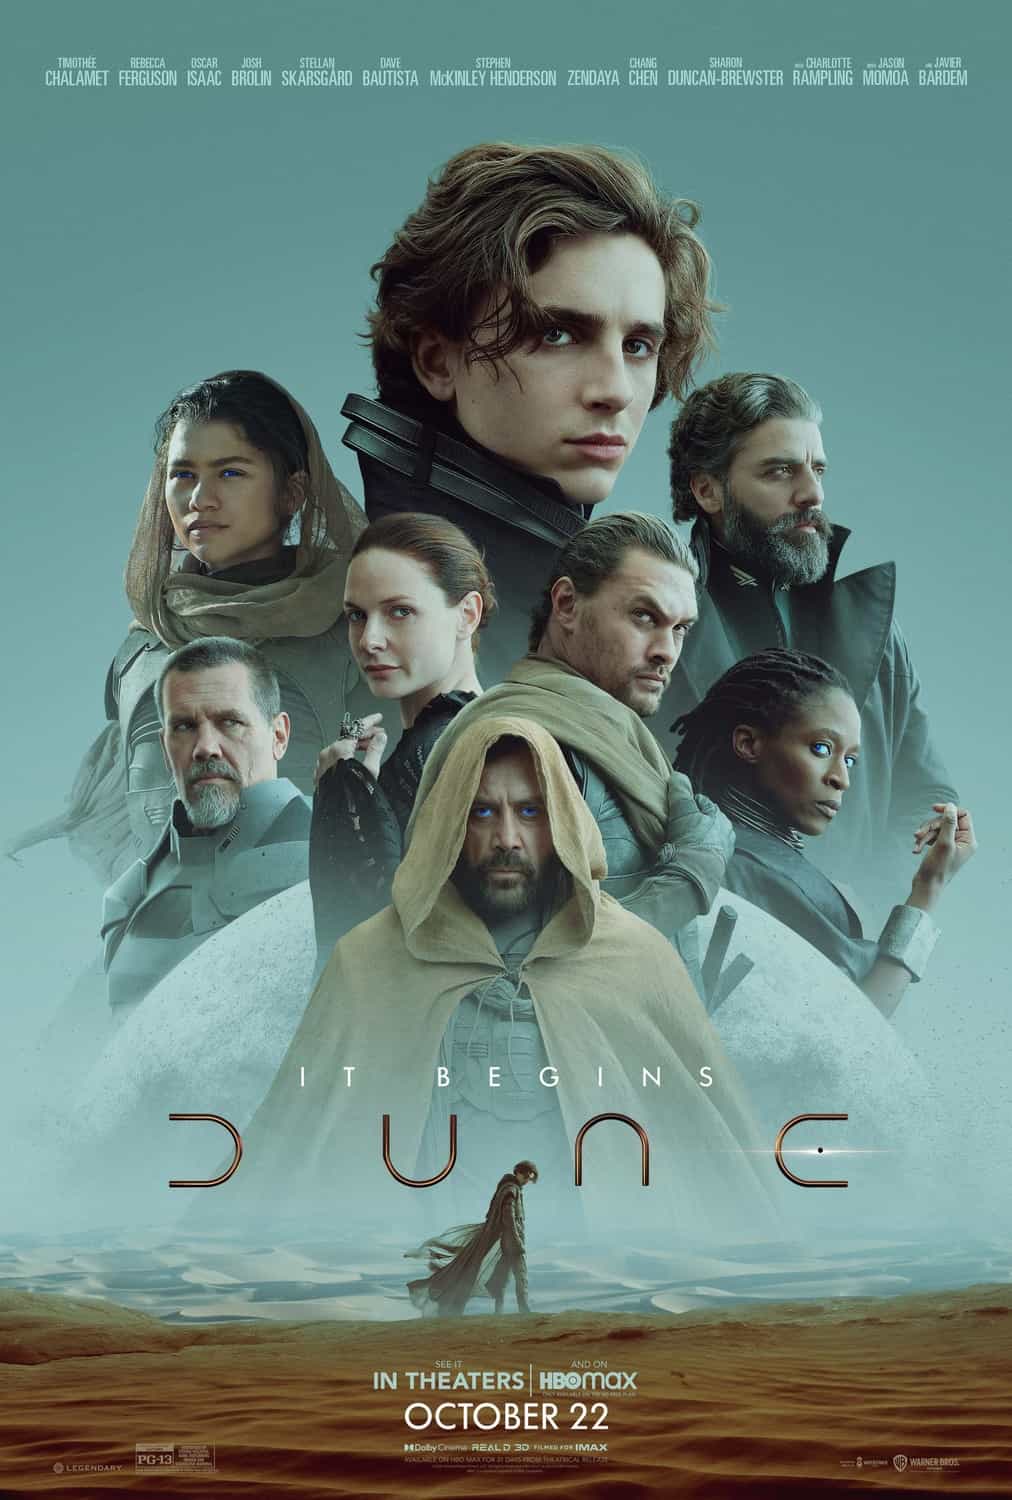 UK new movie preview Friday 22nd October 2021 - Dune, The French Dispatch of the Liberty, Kansas Evening Sun, The Harder They Fall, Digimon Adventure: Last Evolution Kizuna, Dear Evan Hansen 